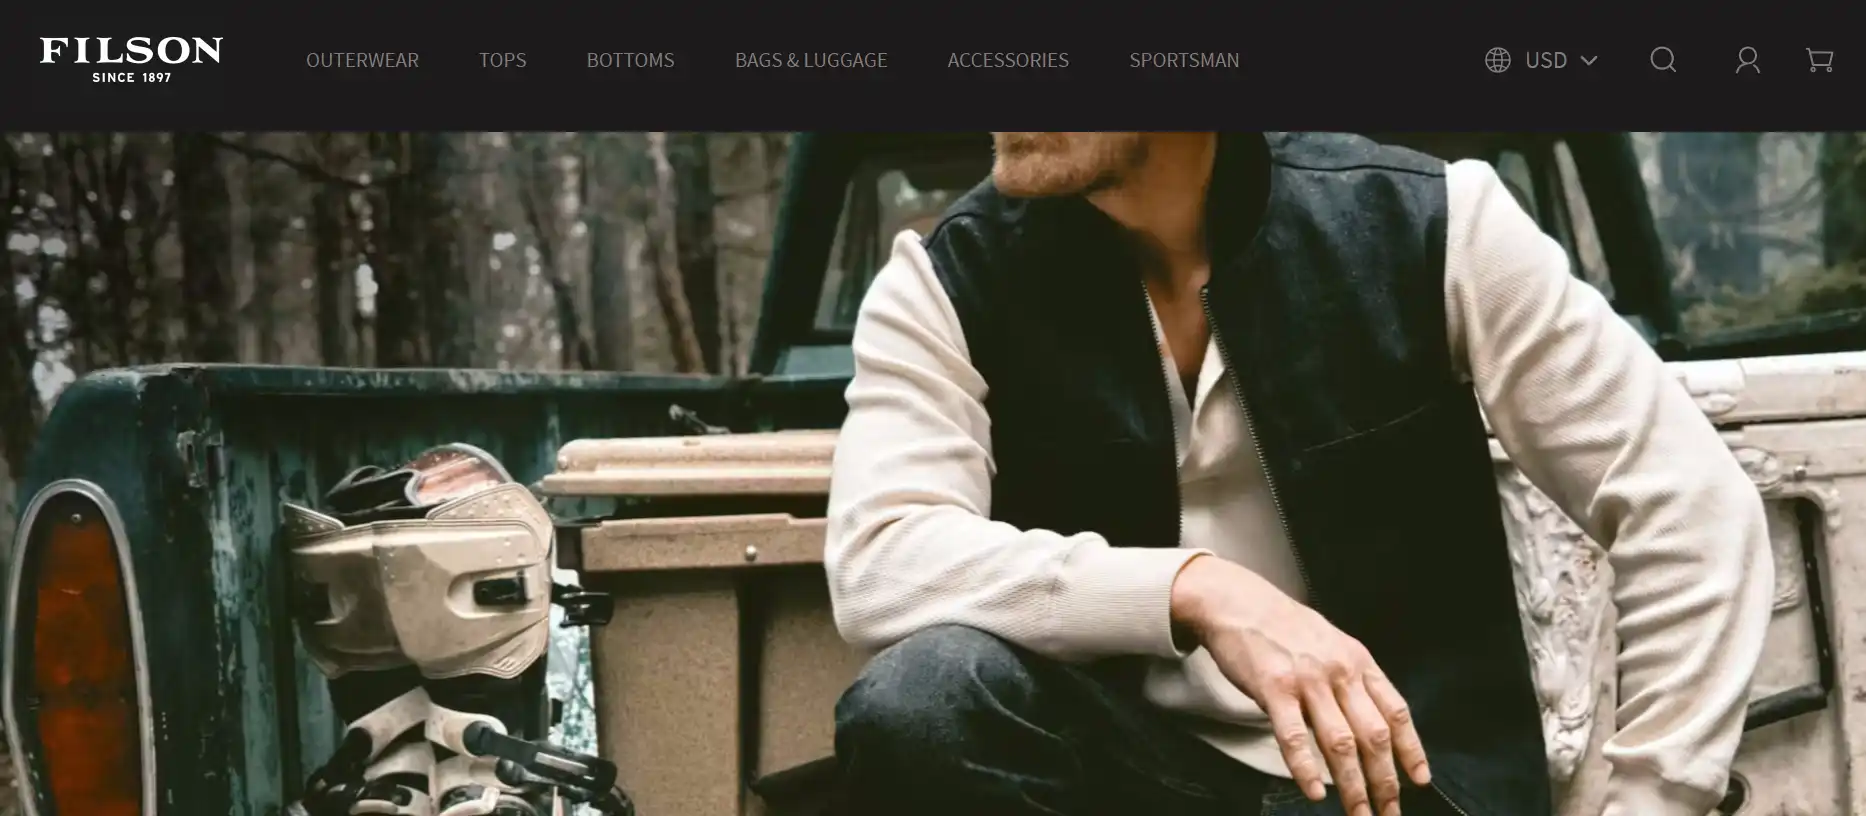 You are currently viewing Filson Outlet Scam or Legit? Don’t be Fooled by Usfilsonoutlet.Shop